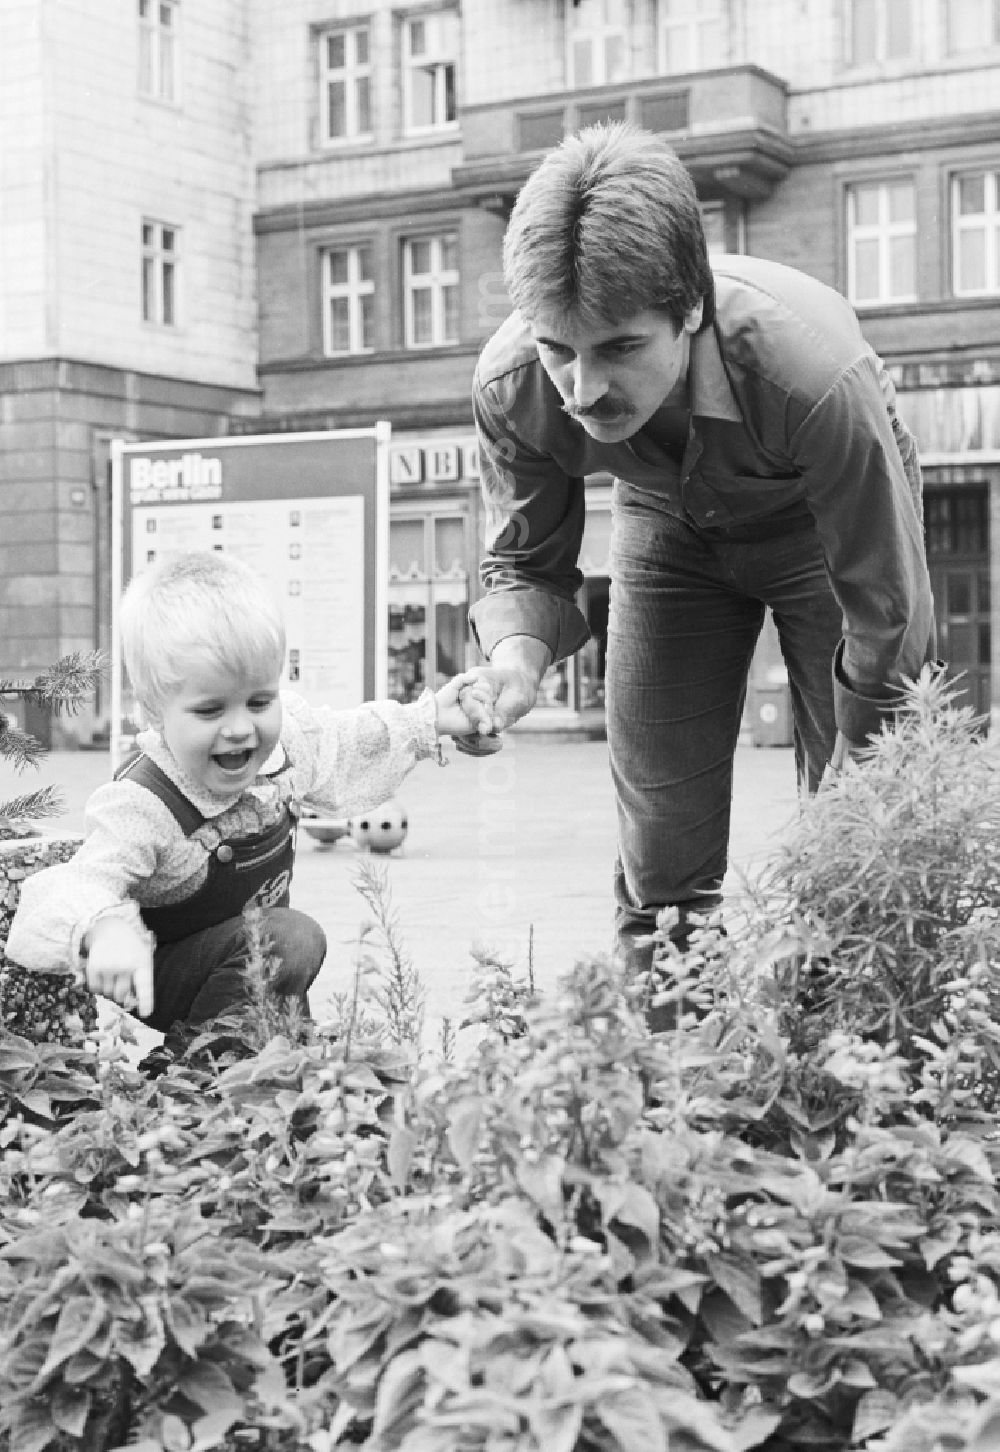 GDR picture archive: Berlin - A father is holding his child in front of a flower bed in the Karl-Marx-Allee in Berlin, the former capital of the GDR, the German Democratic Republic